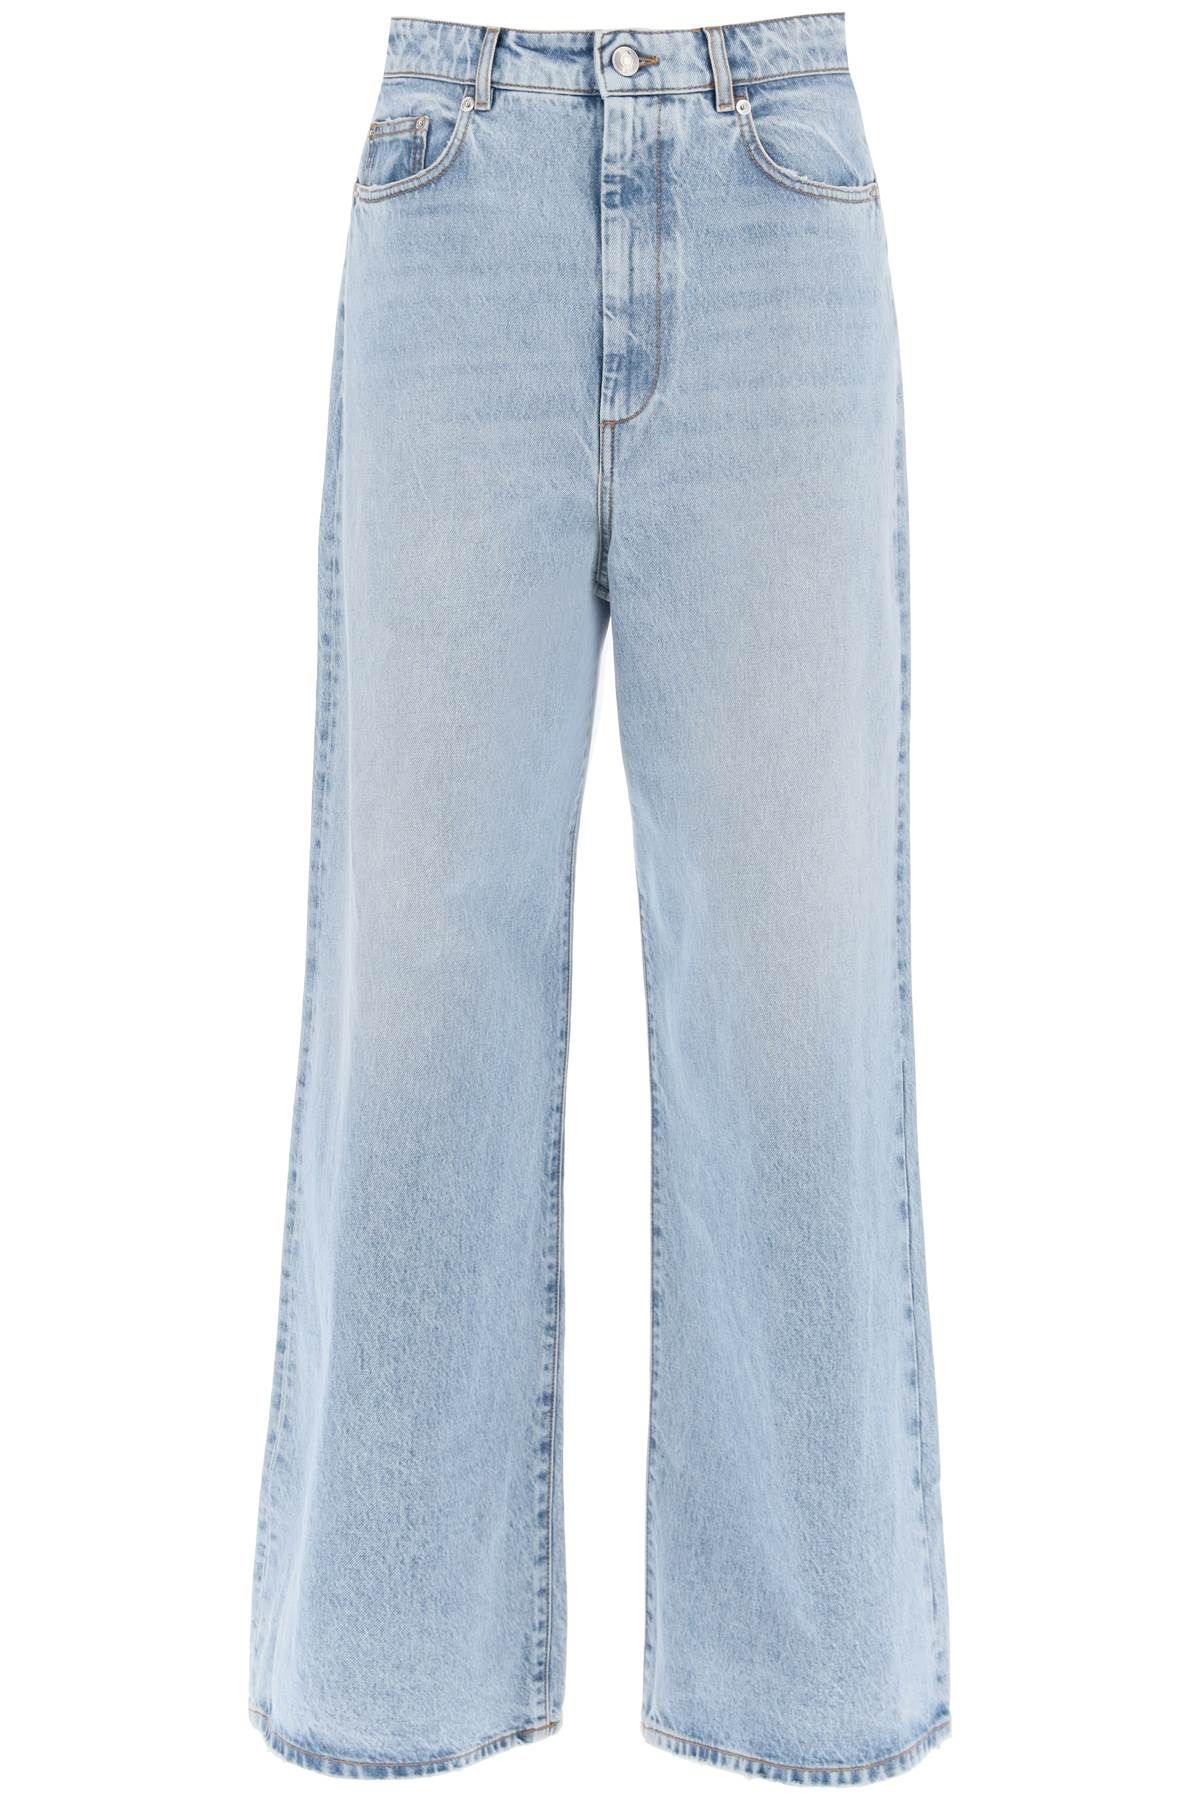 Shop Sportmax Wide-legged Angri Jeans For A In Light Blue